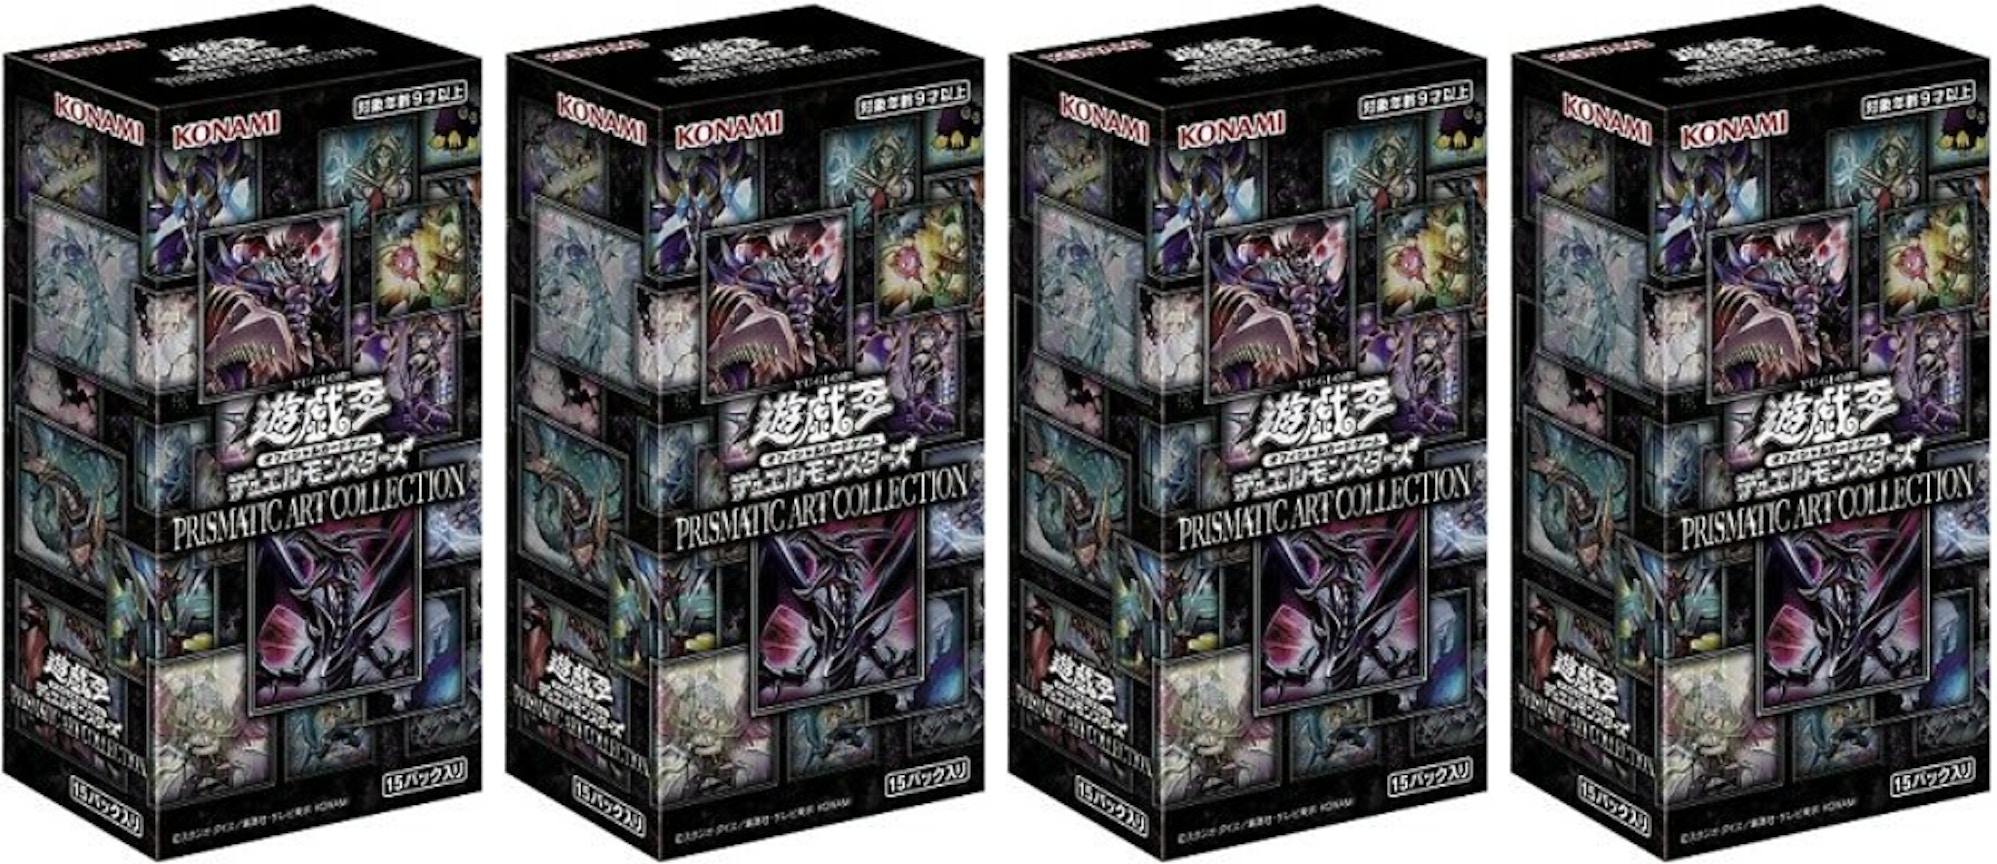 2021 Yu-Gi-Oh! OCG Prismatic Art Collection Prismatic Art Collection